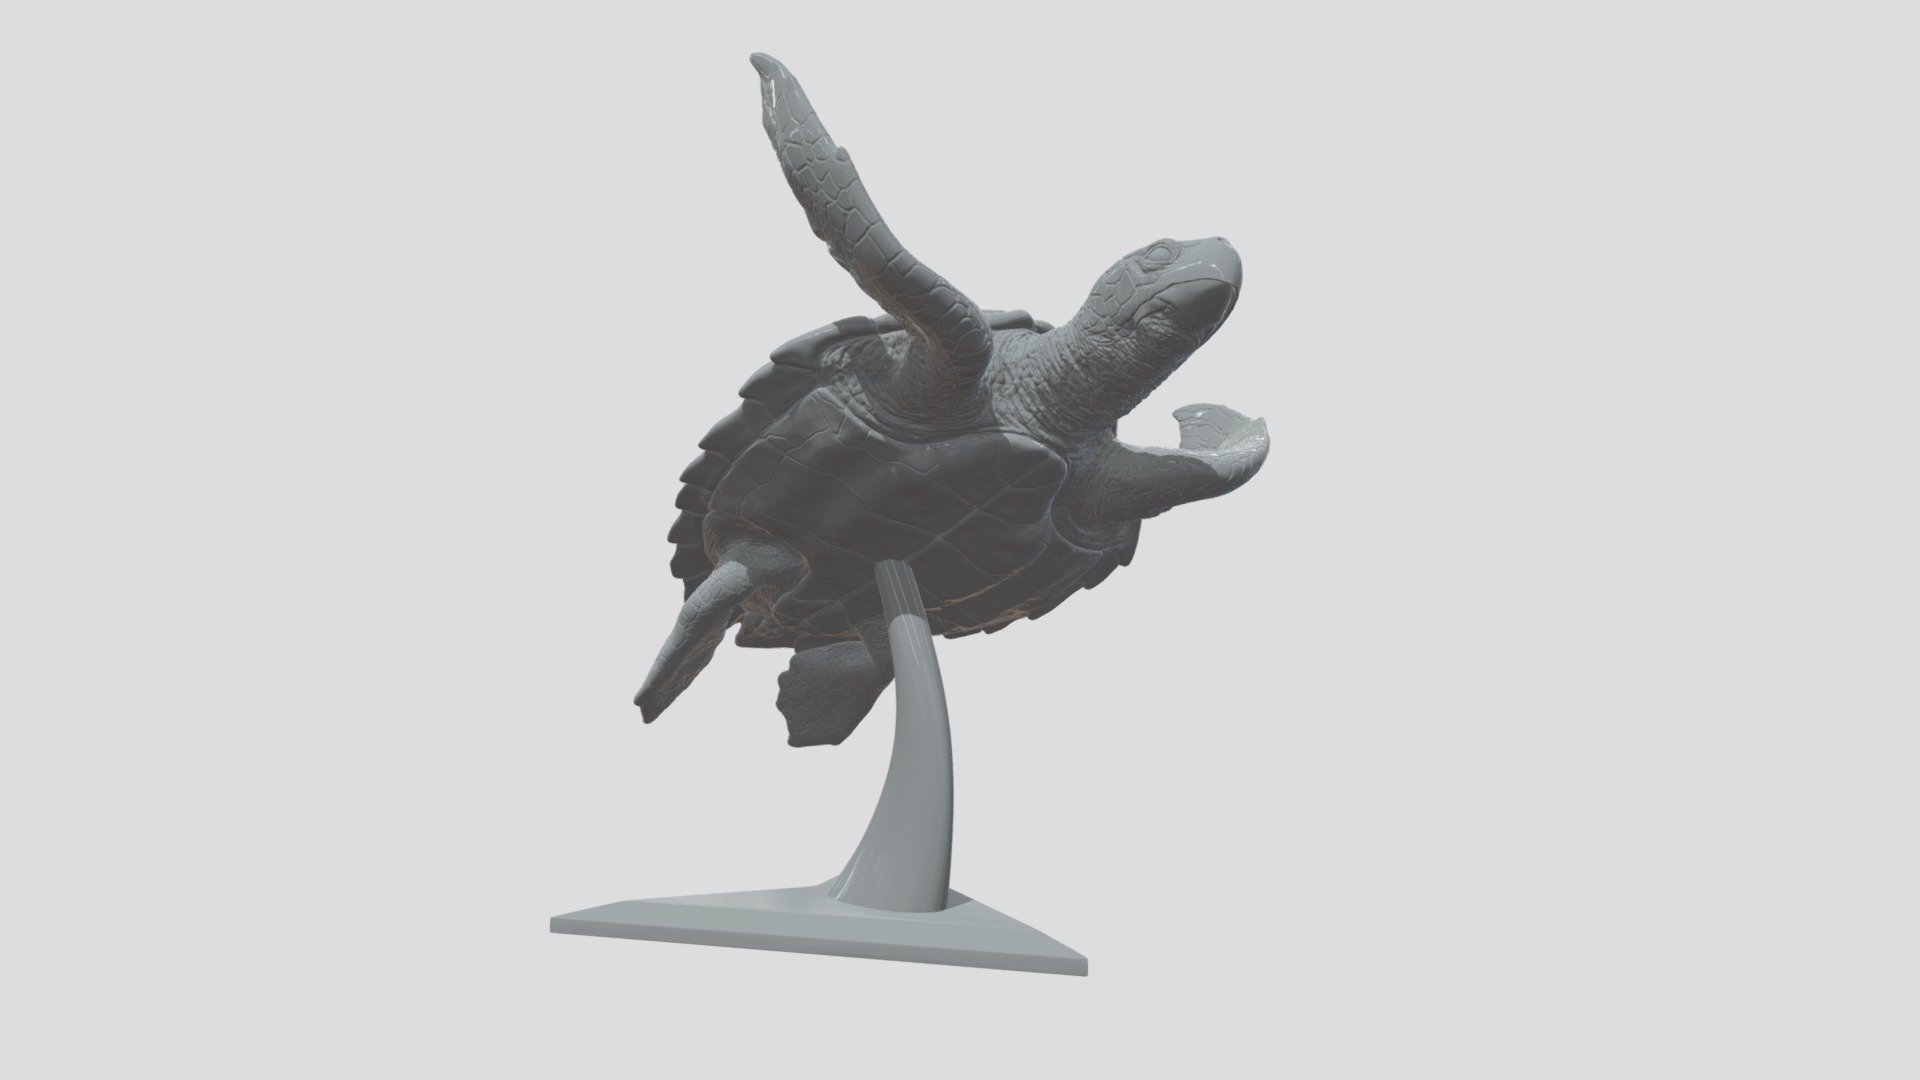 Hawksbill Sea Turtle High Poly, sculpted in ZBrush 2020. Maybe used for Jewelry design, interiour design, digital visualisation, for the production of illustrations. Default size - 20 cm tall (you can scale it up or down). Ideal for printing 3D

3 Part 3D Printing

Compositions

Board Game

Decoration

Motion graphics - Destruction of solids

Etc....

Does not contain UVs Maps

Piece with 20 cm

Files : 

FBX

Does not contain lighting

I hope it will be useful in your project !

Thank you for visiting my models !! - Turtle - Buy Royalty Free 3D model by aleexstudios 3d model